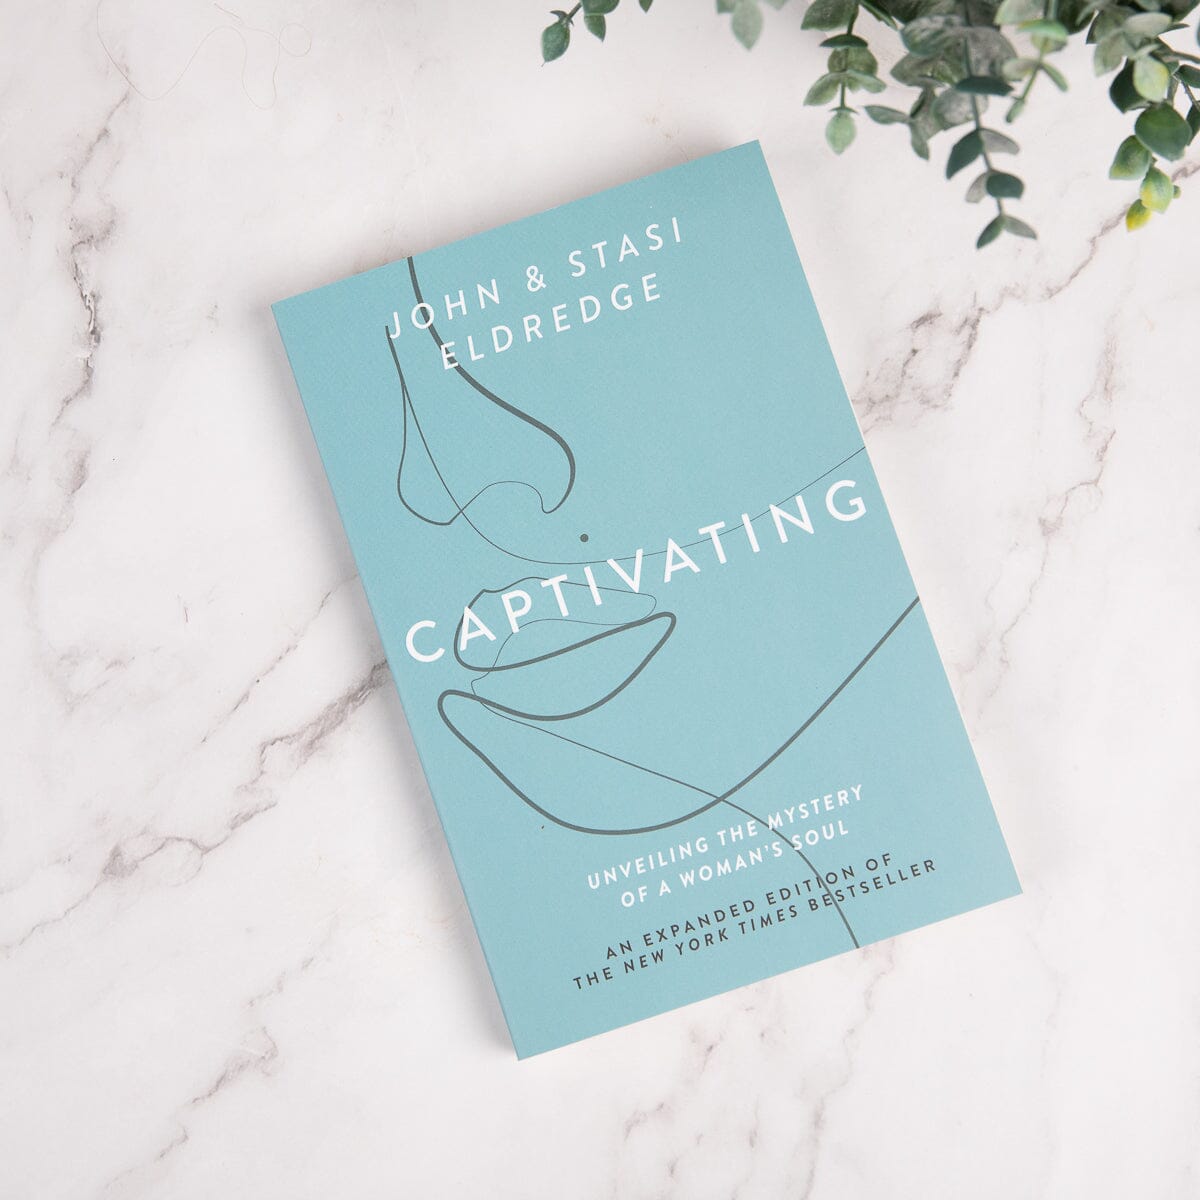 Captivating by Stasi and John Eldredge